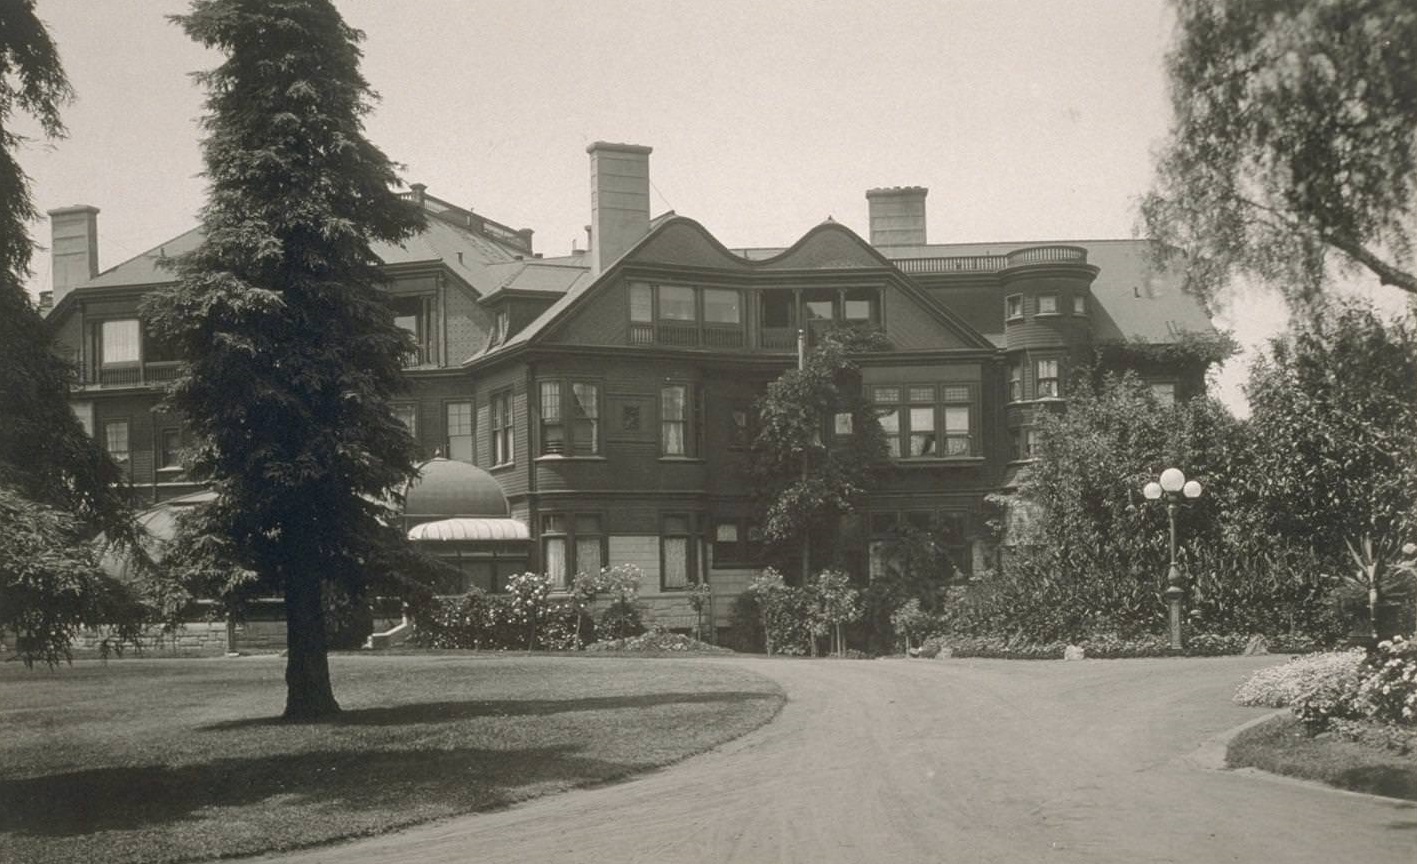 Side View, F. M. Smith Home, Oakland, 1930s